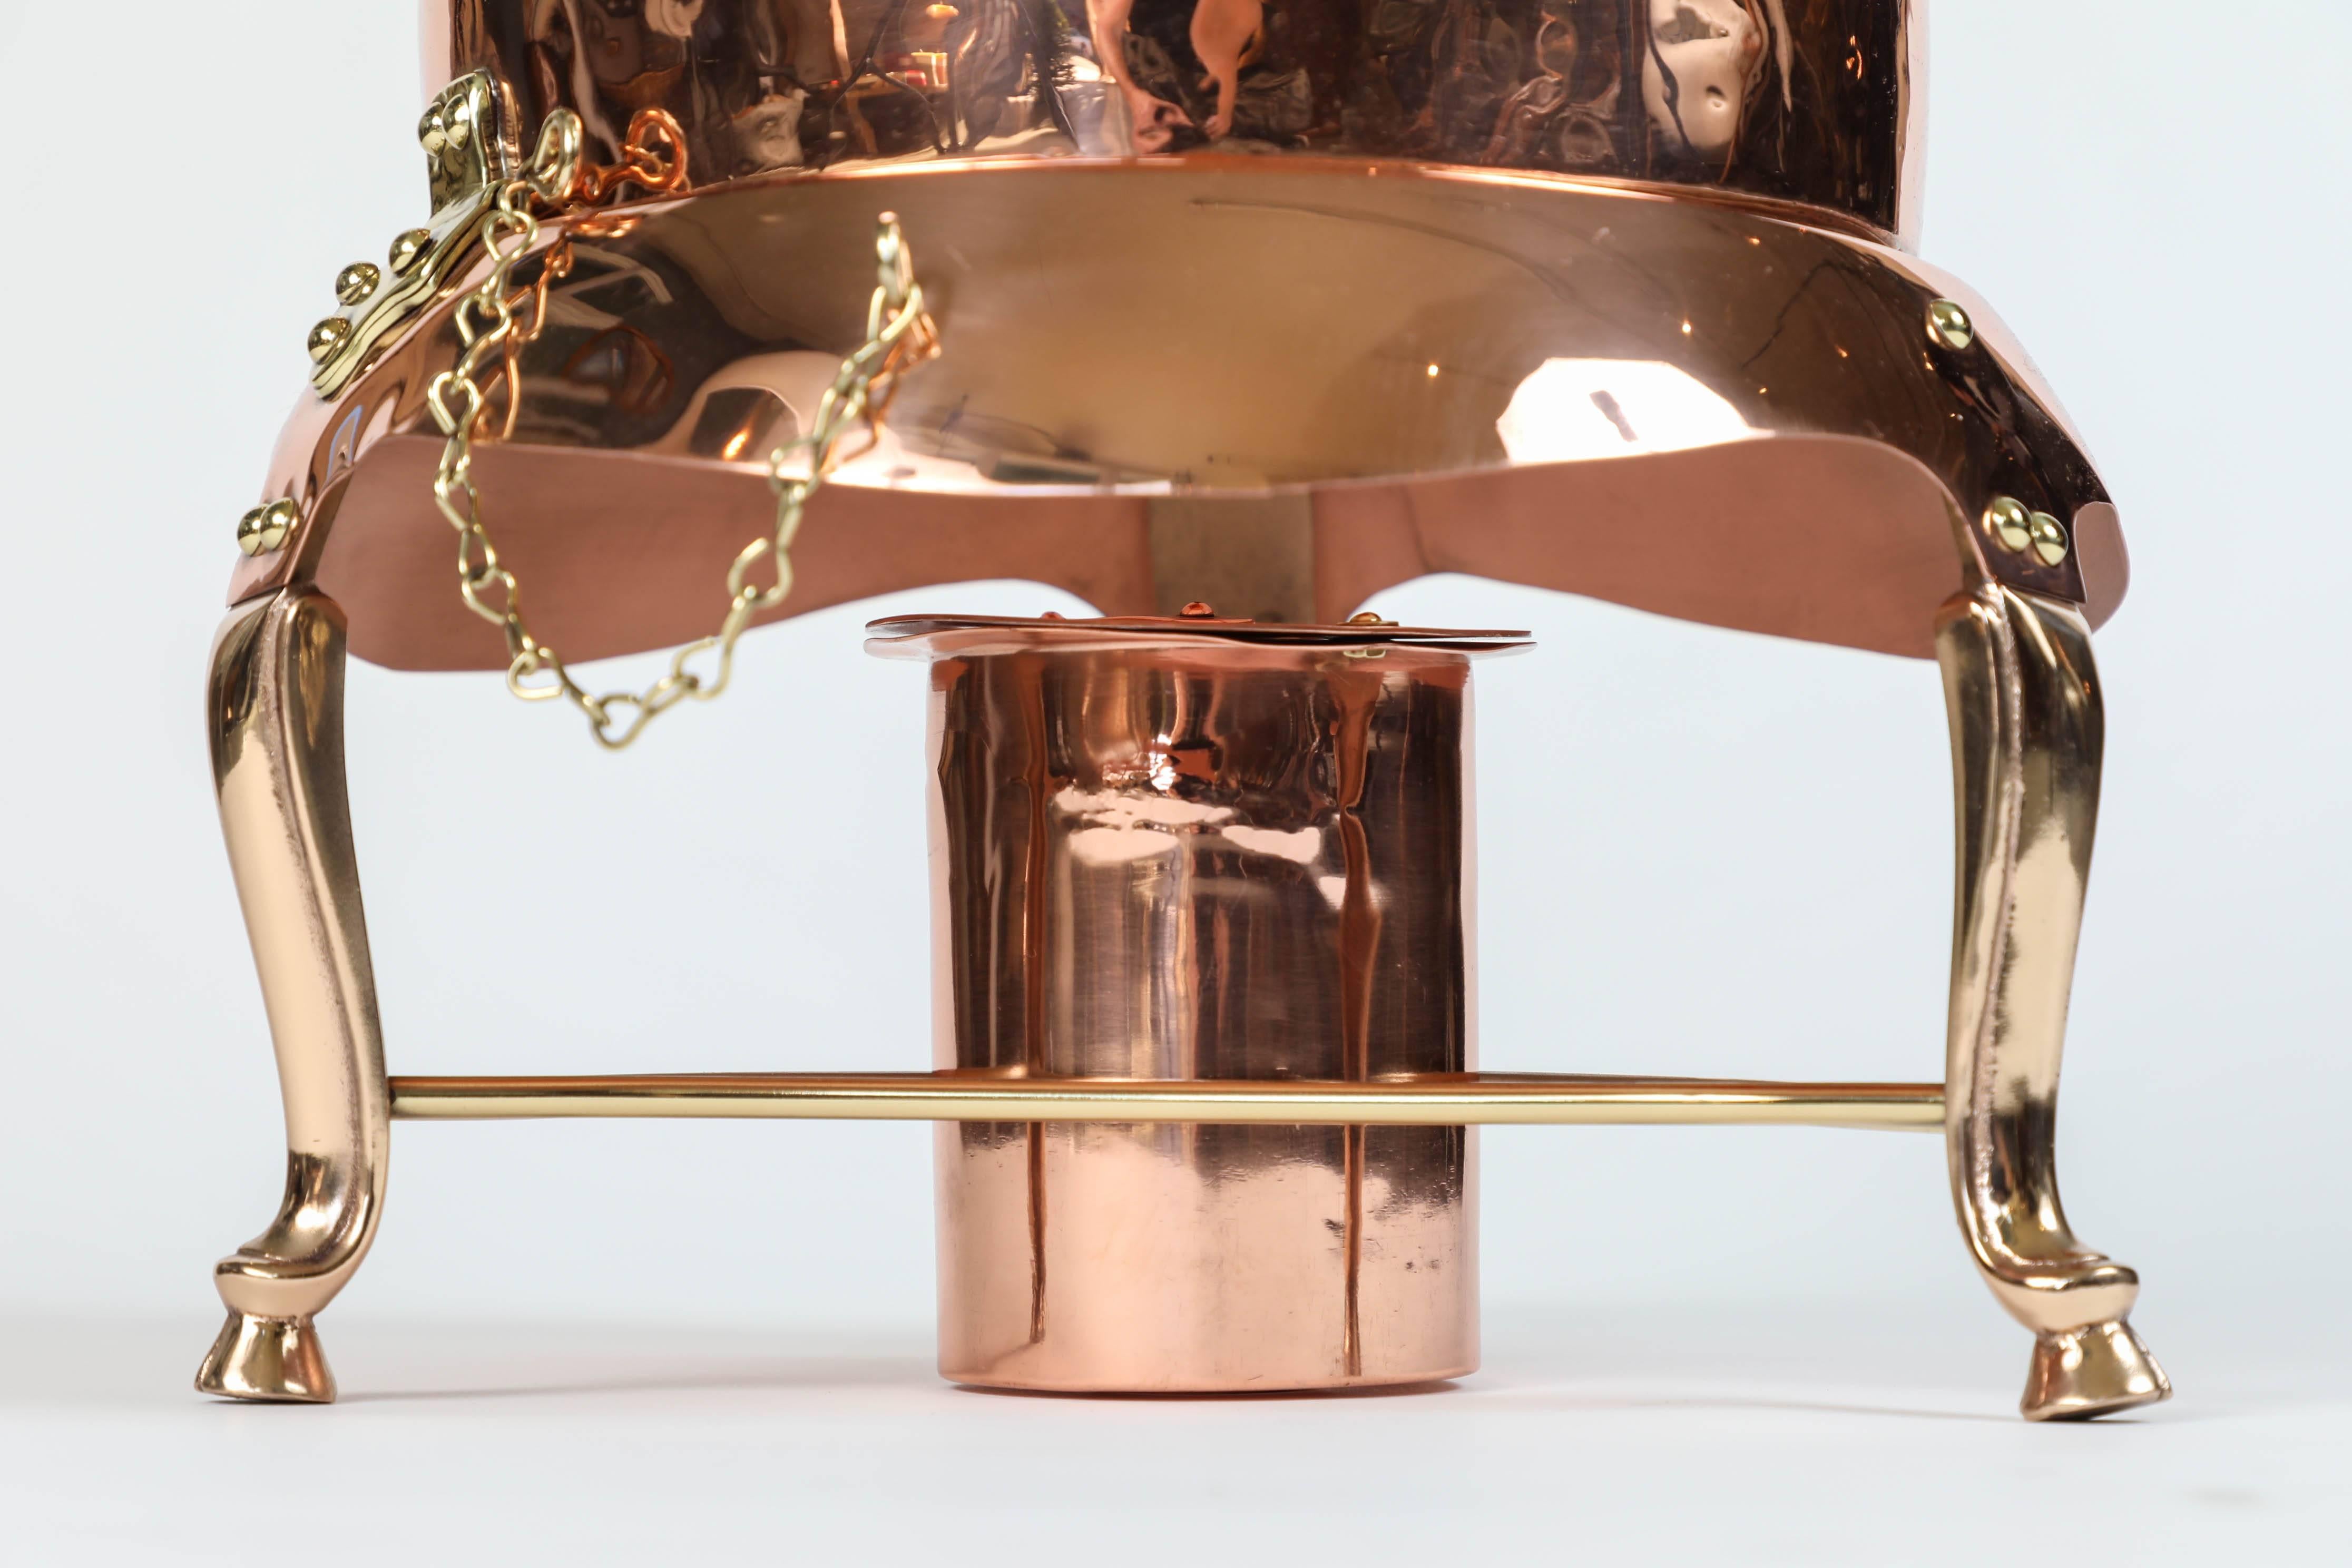 Newly polished vintage large two-gallon copper and brass coffee urn made by J. C. Moore, California Coppersmith. This piece features his trademark hand-carved flame handle. Mounted on brass legs and chained to tilt for easy pouring with matching